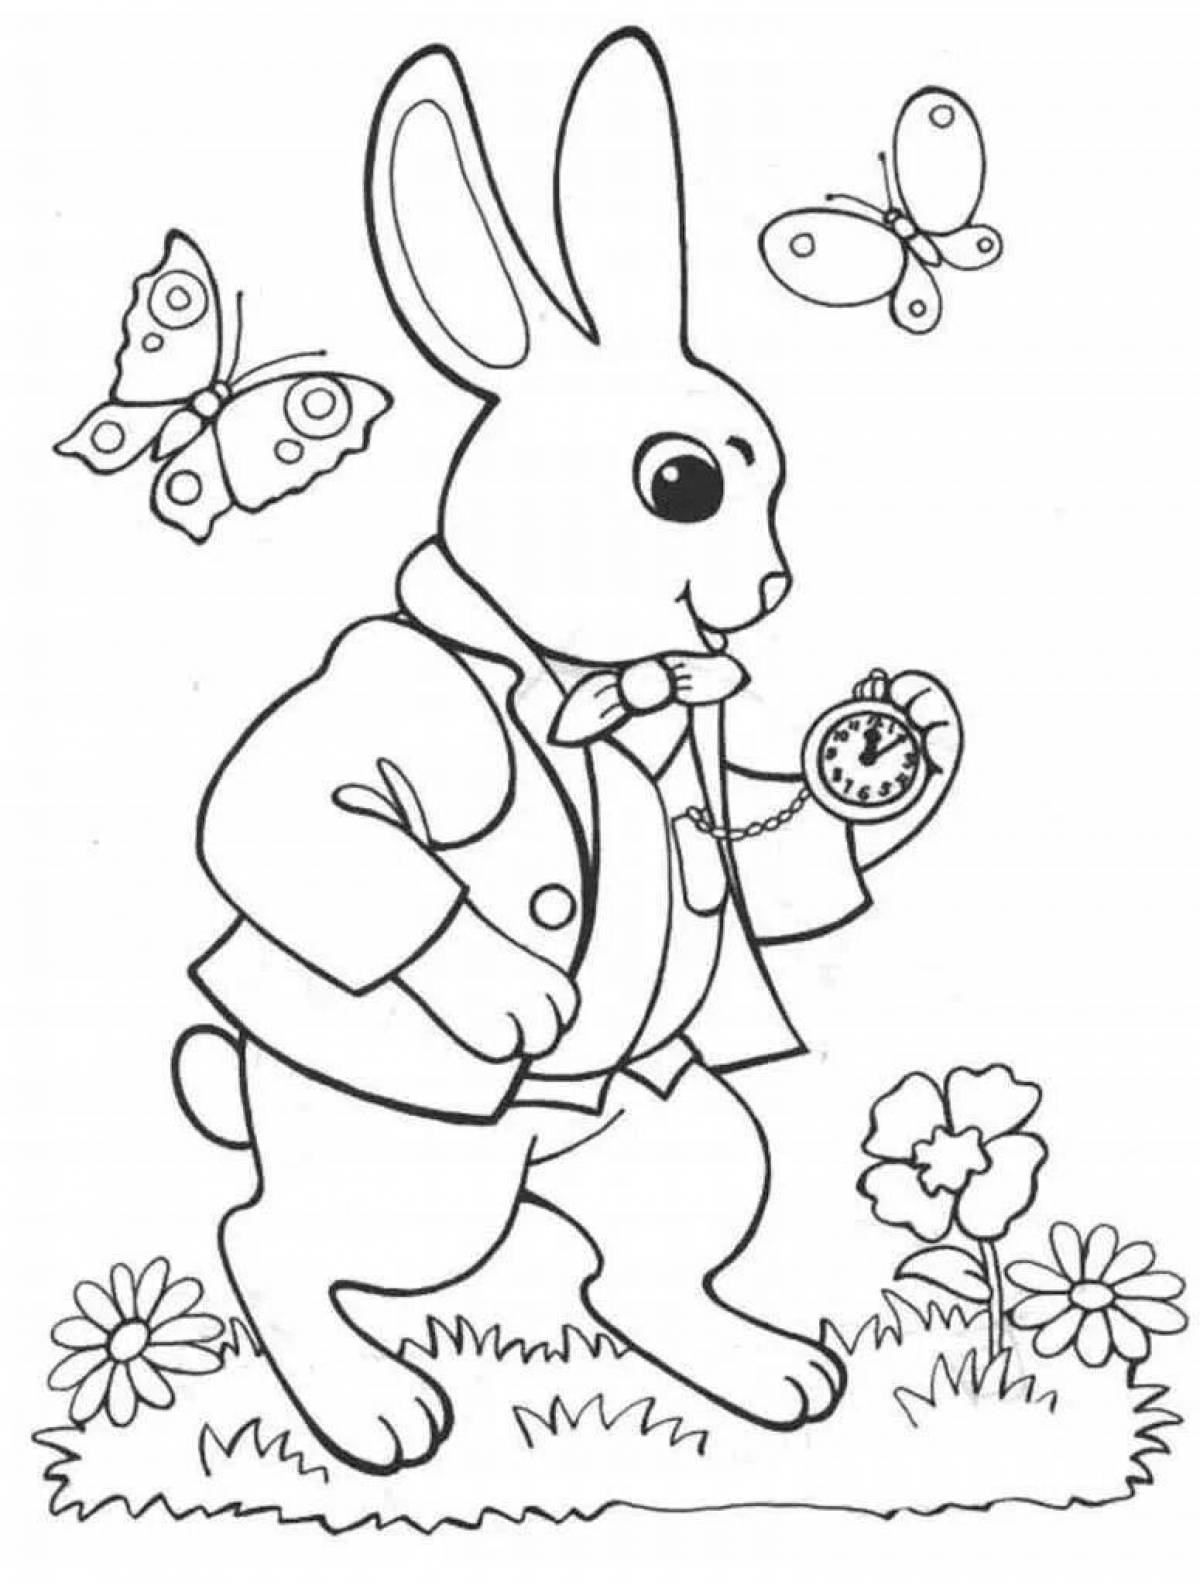 Witty coloring pages for bunny girls